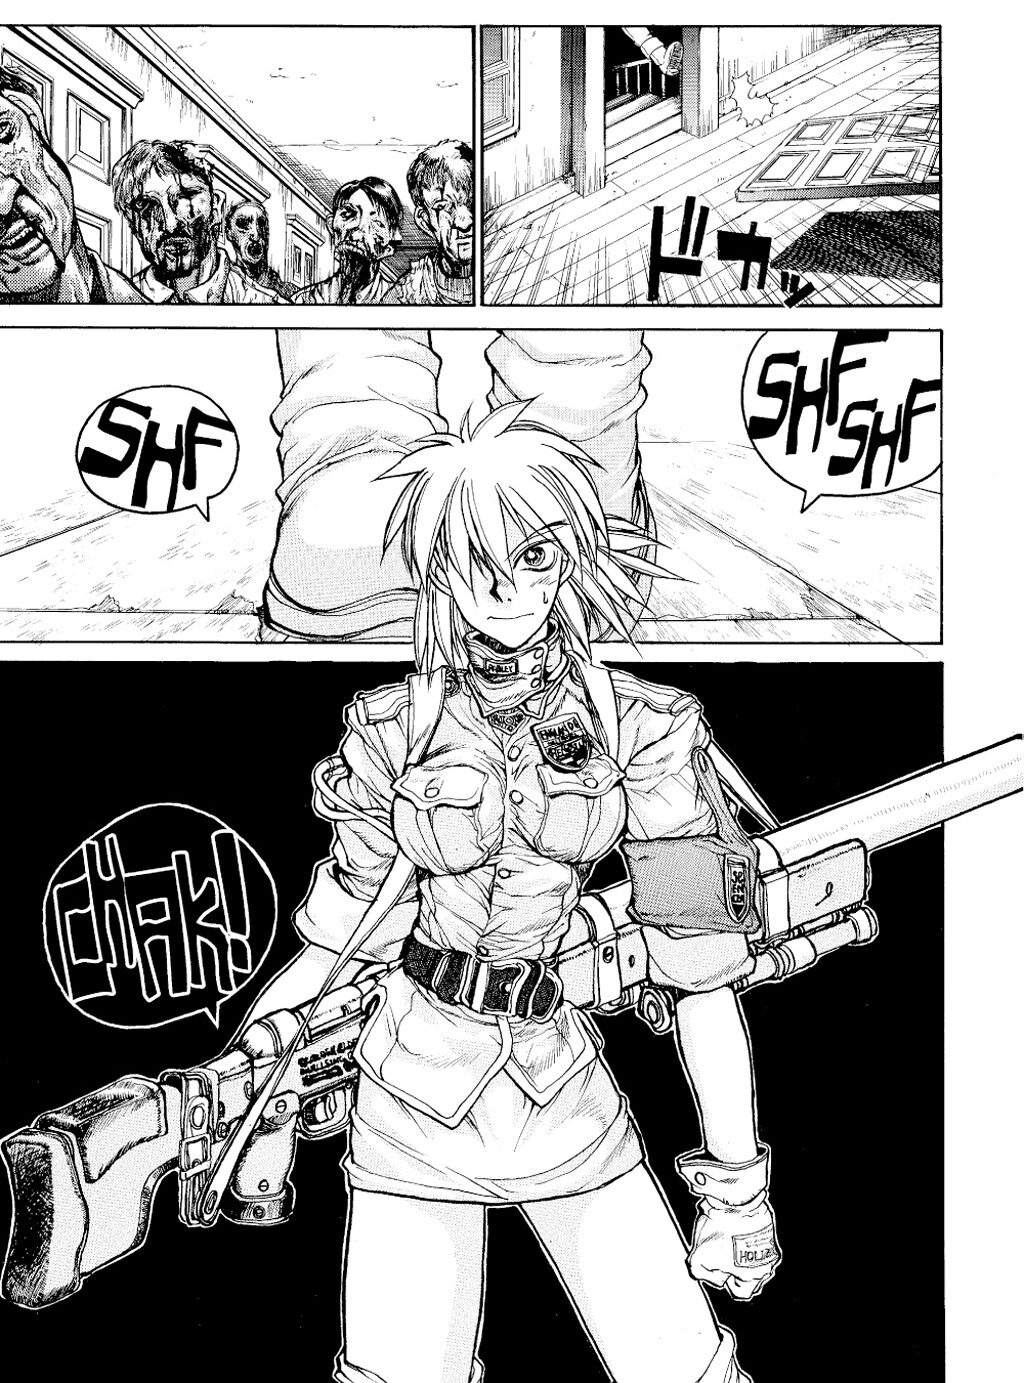 Seras Victorias practices with her newly acquired vampire abilities in Hellsing Ch. 4 "Sword Dancer 1" (1998), Shōnen Gahōsha